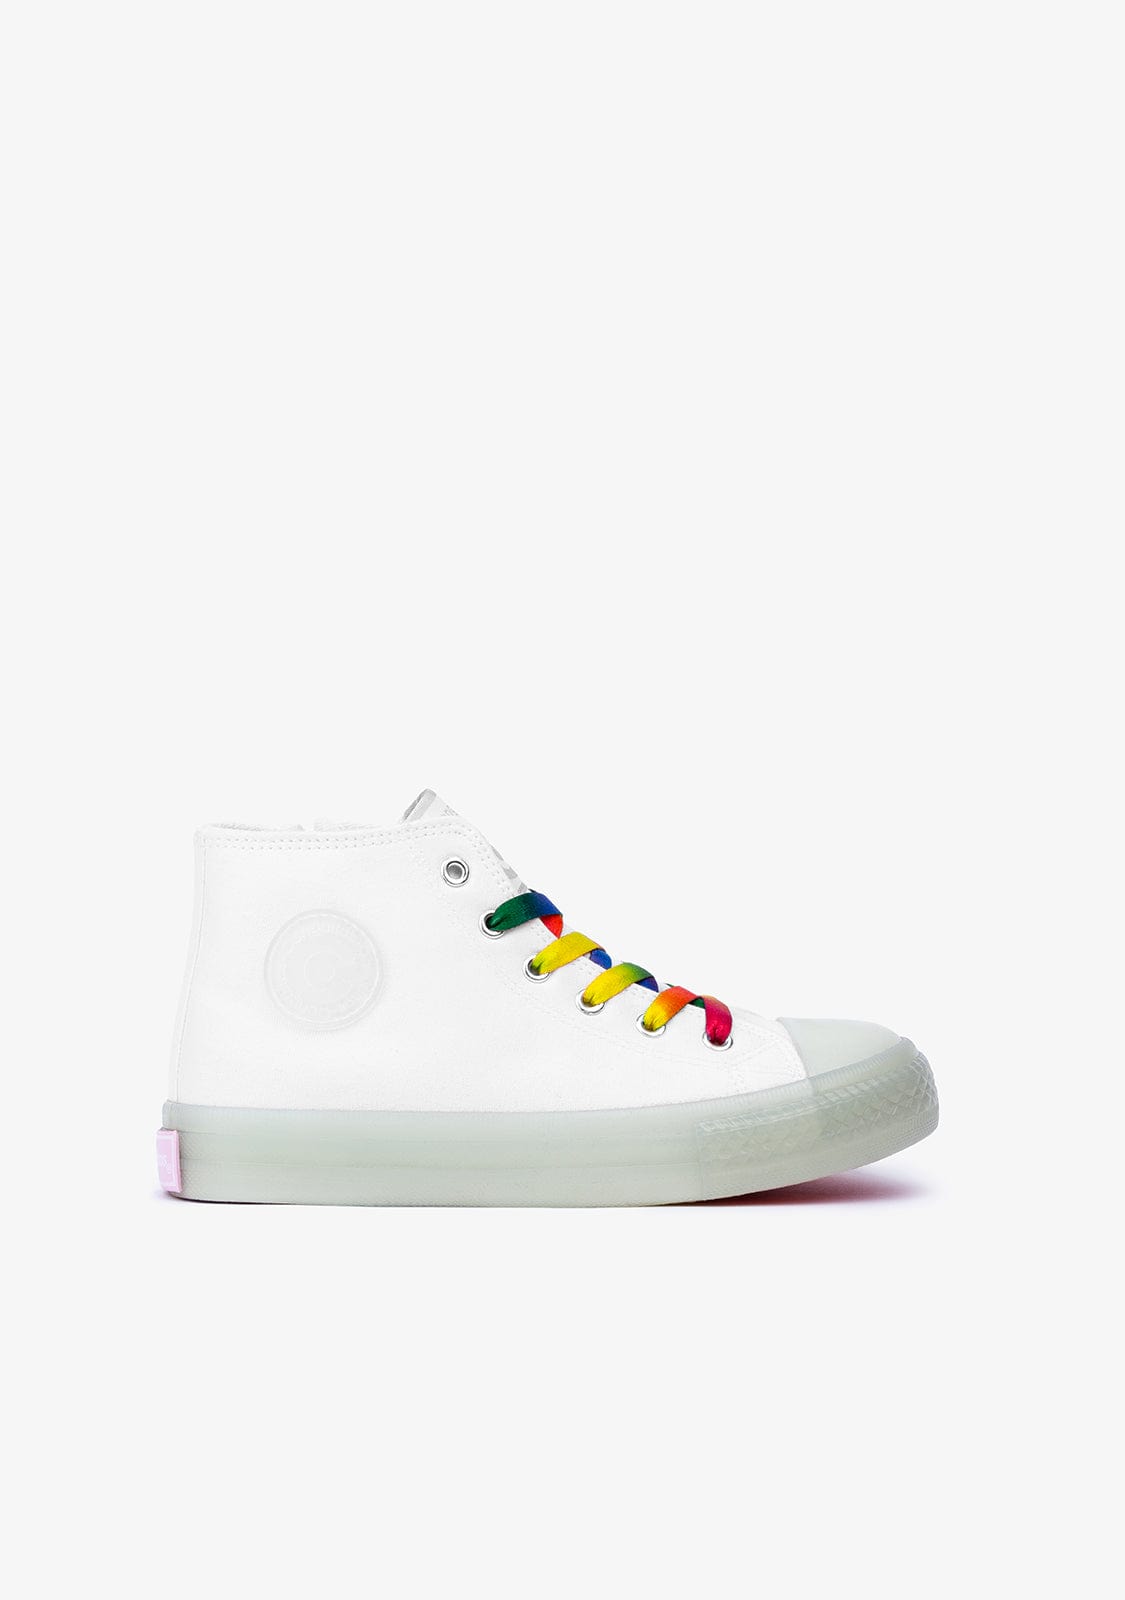 CONGUITOS Shoes Unisex White Cord With Lights Hi-Top Sneakers Canvas